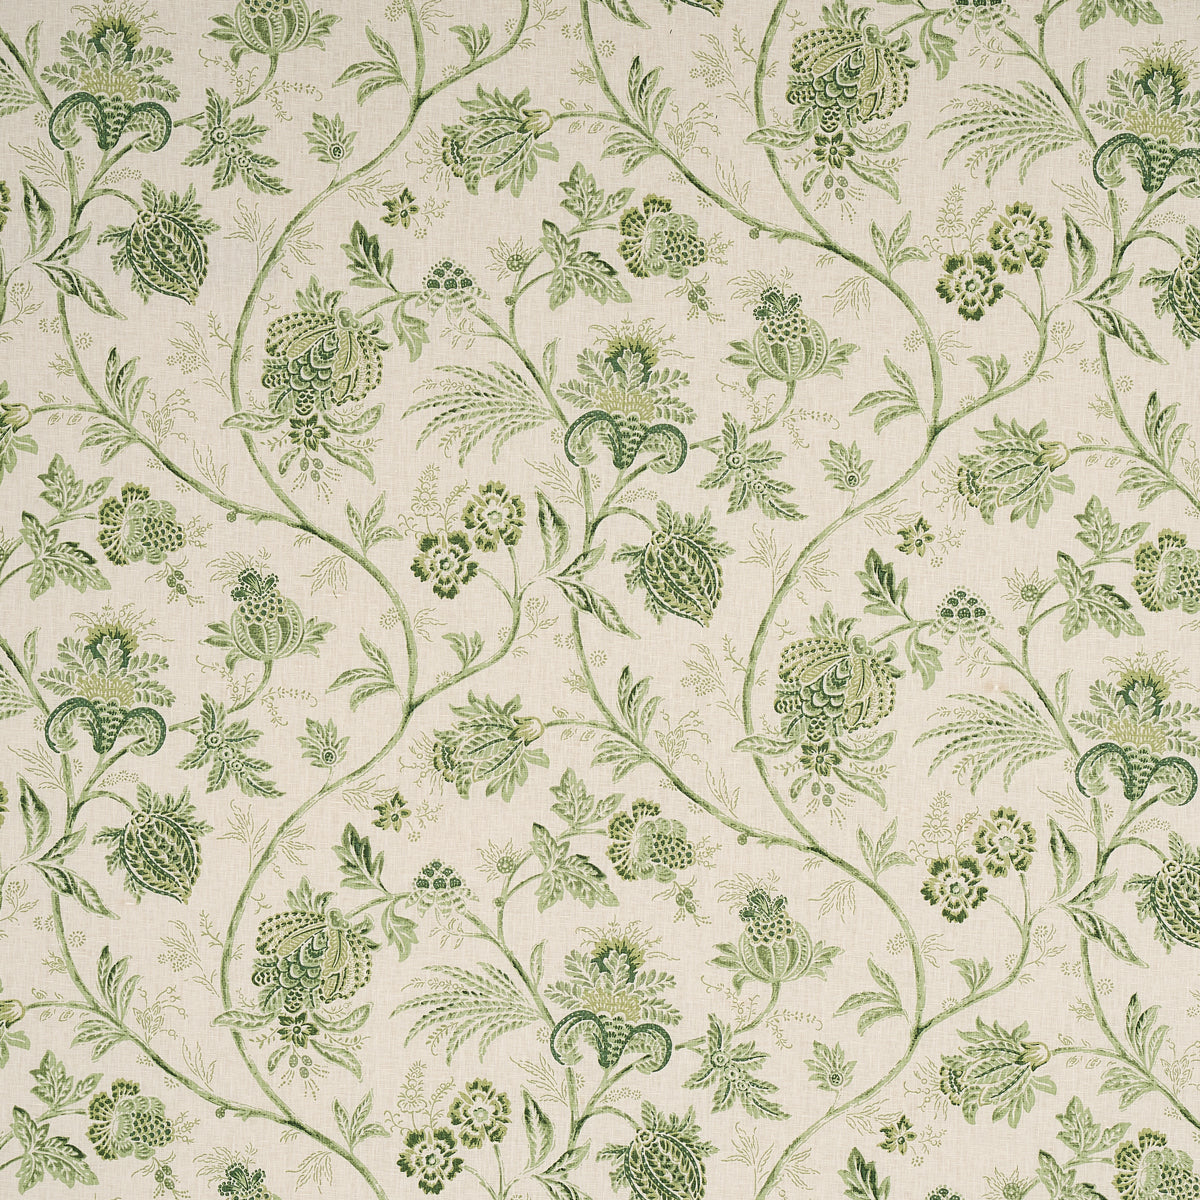 Purchase 176492 Chinoiserie Vine, Leaf Green by Schumacher Fabric